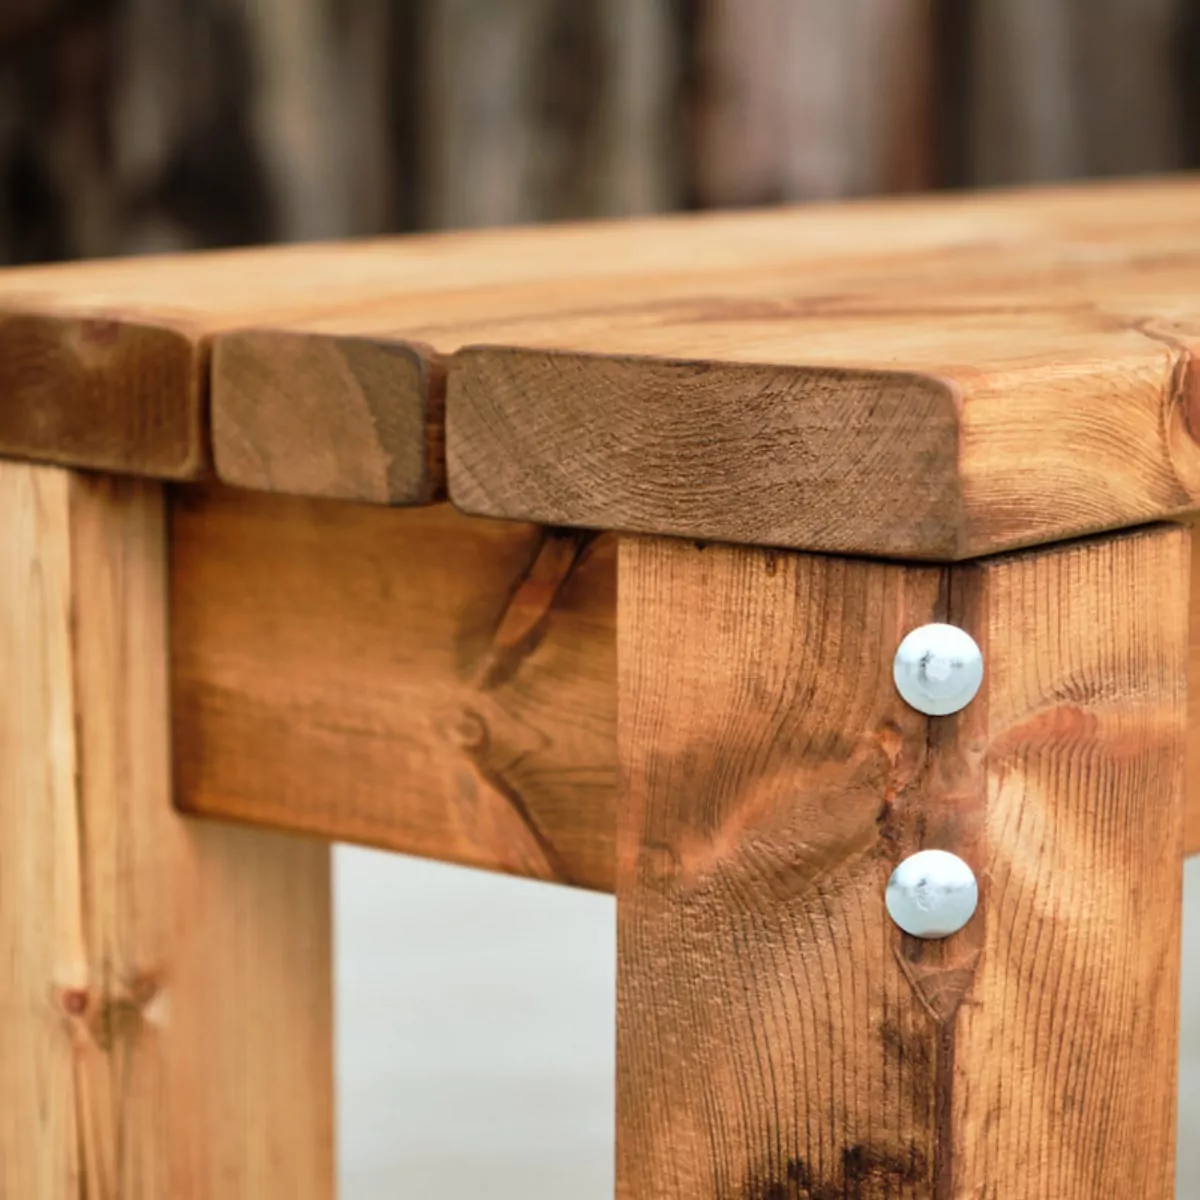 Castle-Range-wooden-bench-seat-close-up-of-the-end-joint-with-robust-bolt.jpg